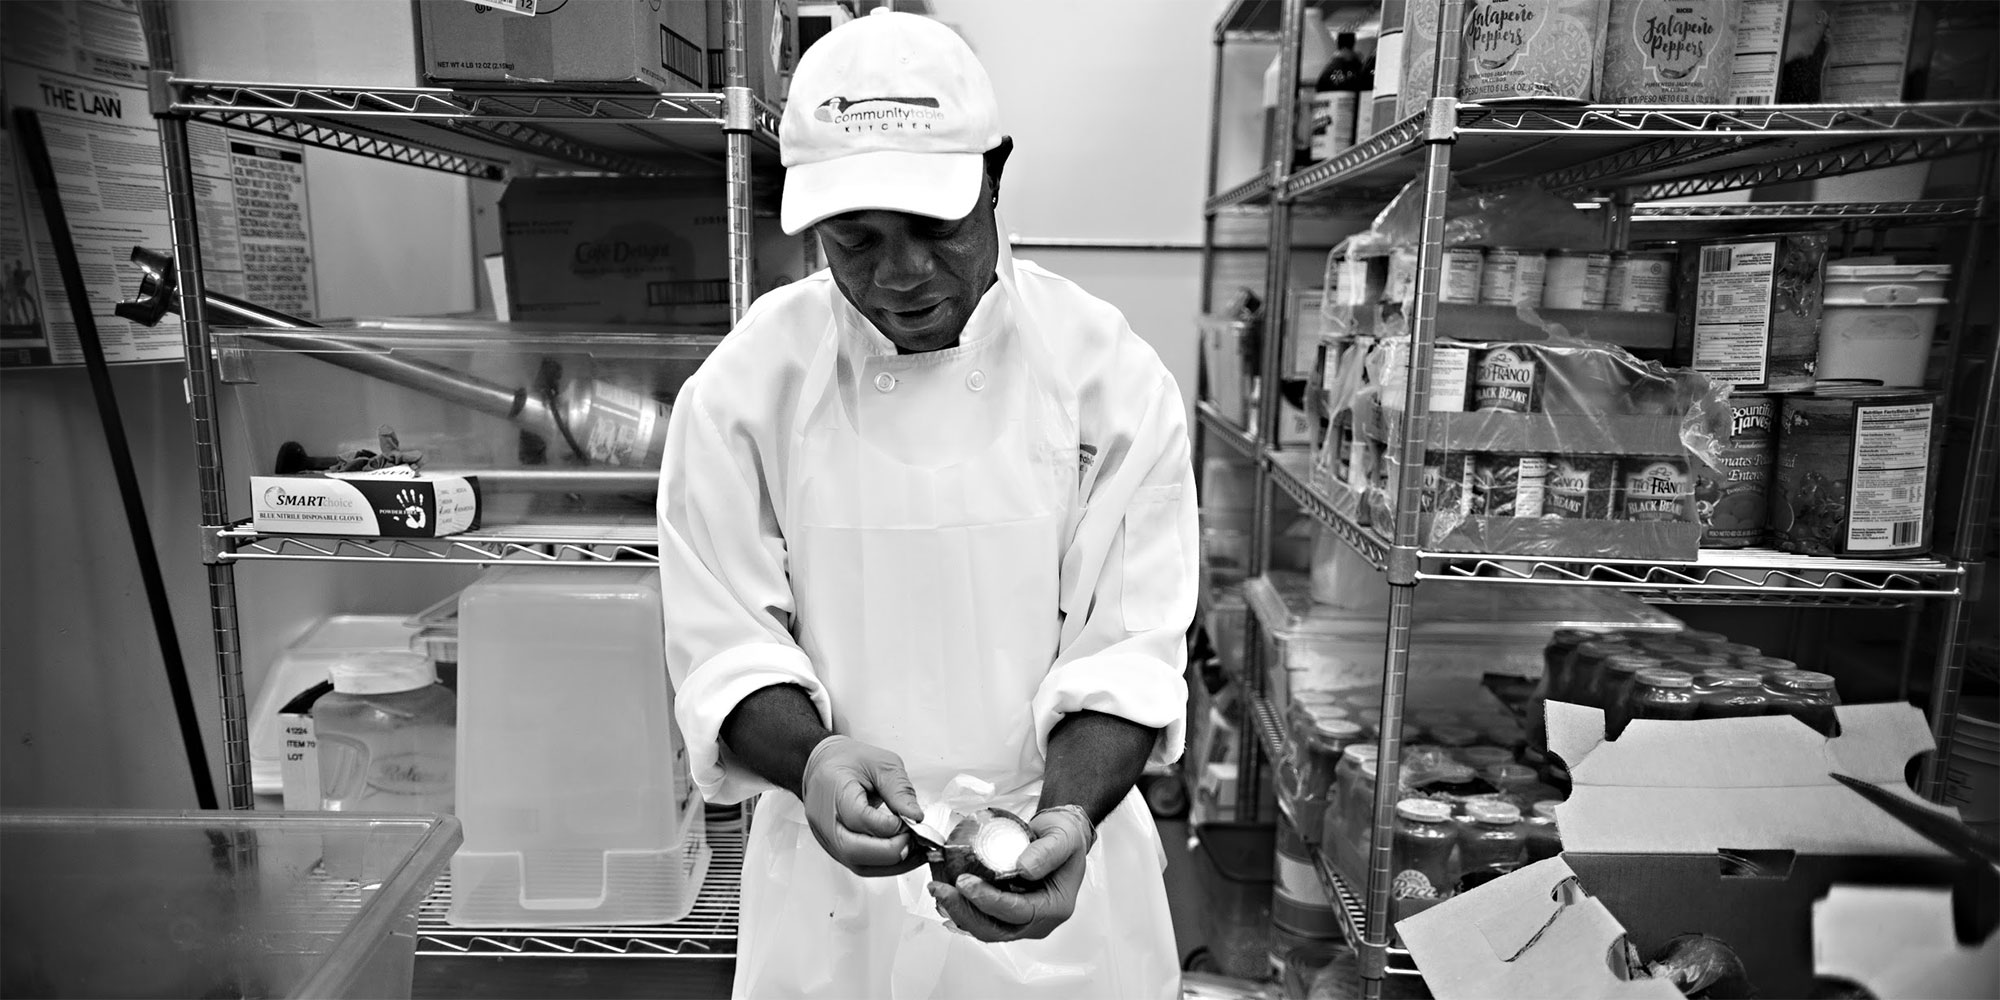 A man preps food in a commercial kitchen